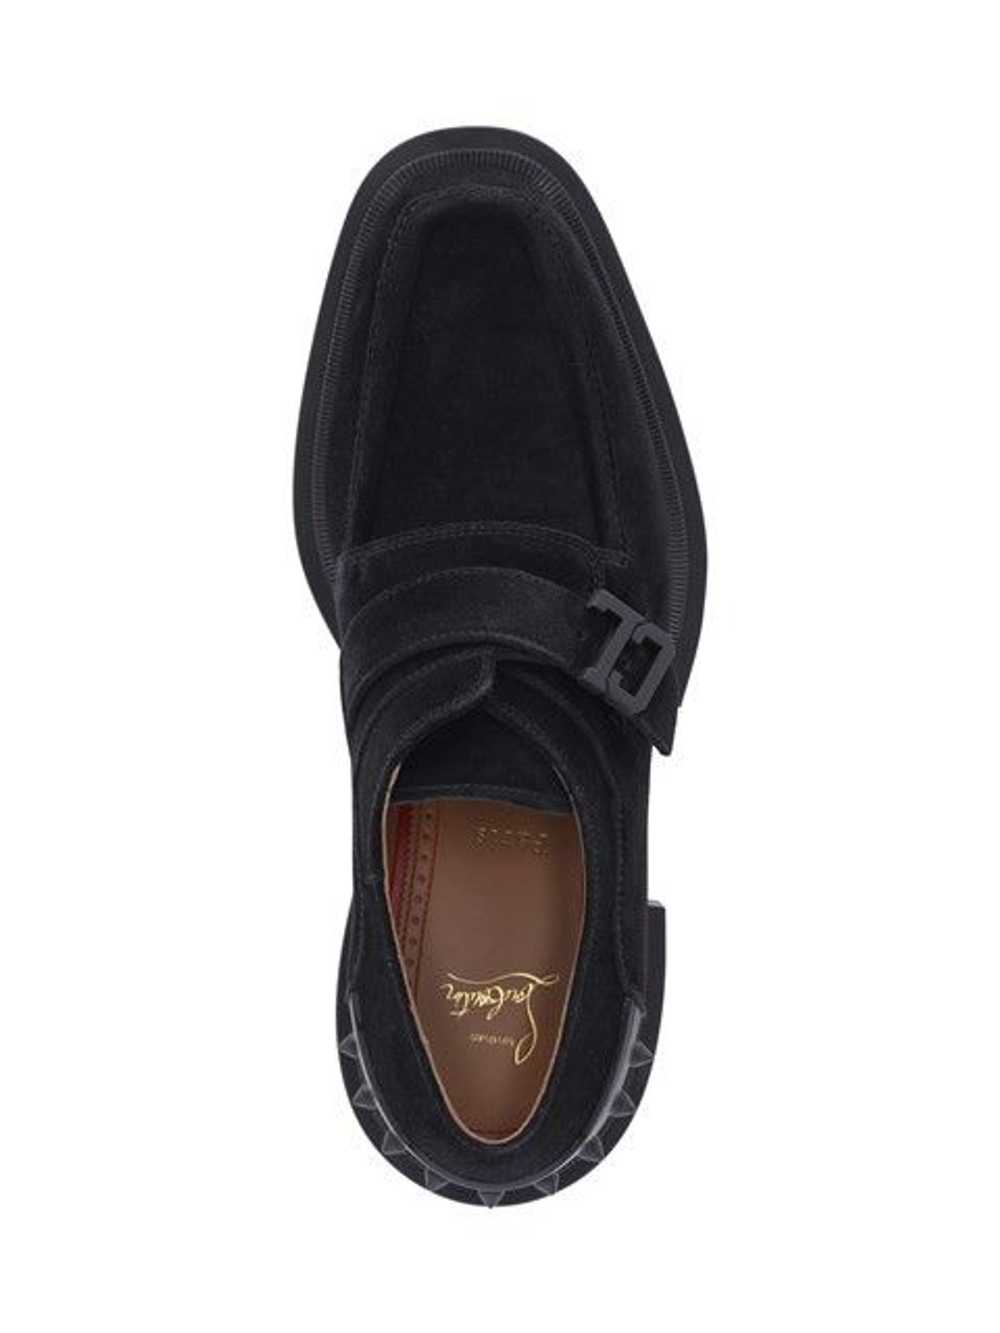 Christian Louboutin SUEDE LOAFERS - image 5